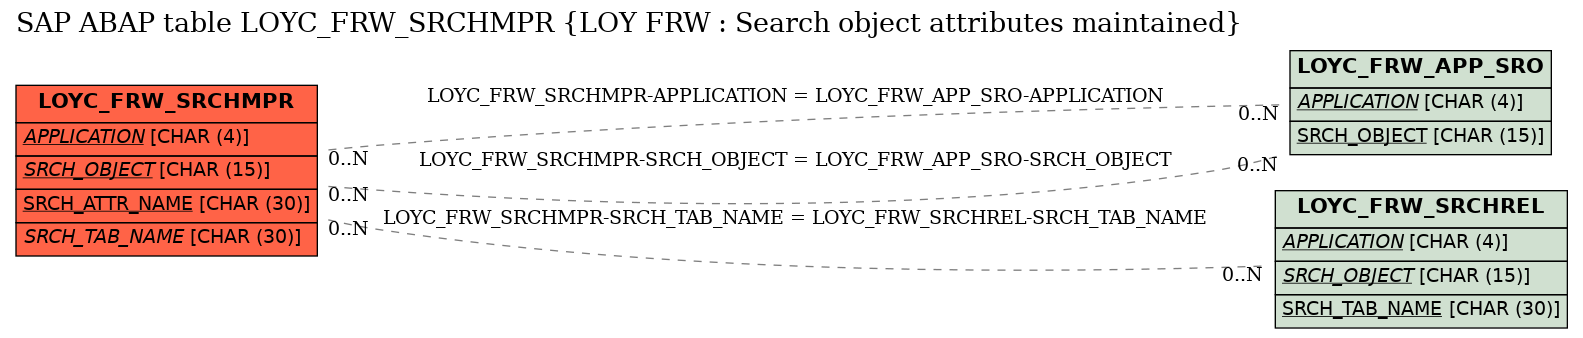 E-R Diagram for table LOYC_FRW_SRCHMPR (LOY FRW : Search object attributes maintained)